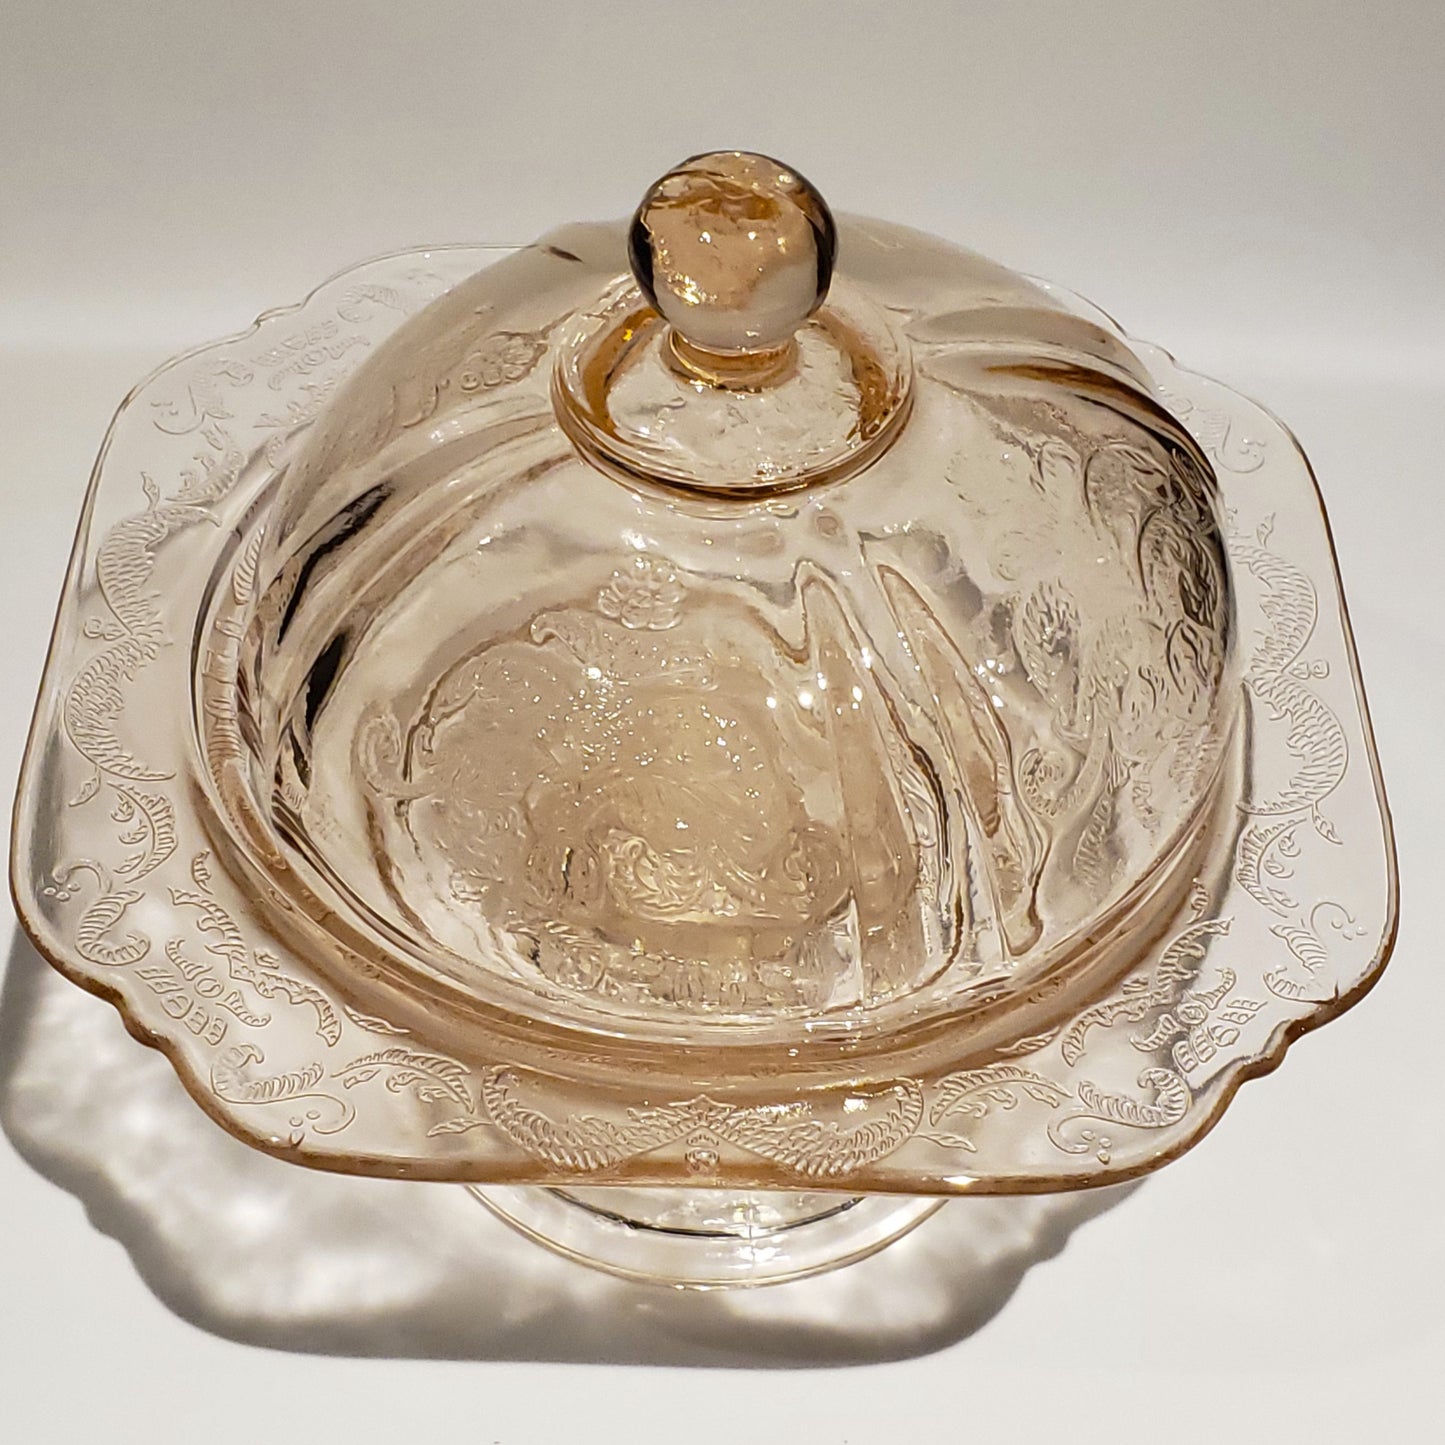 Pink Depression Glass Pedestal Dish with Lid, by Federal Glass Co.